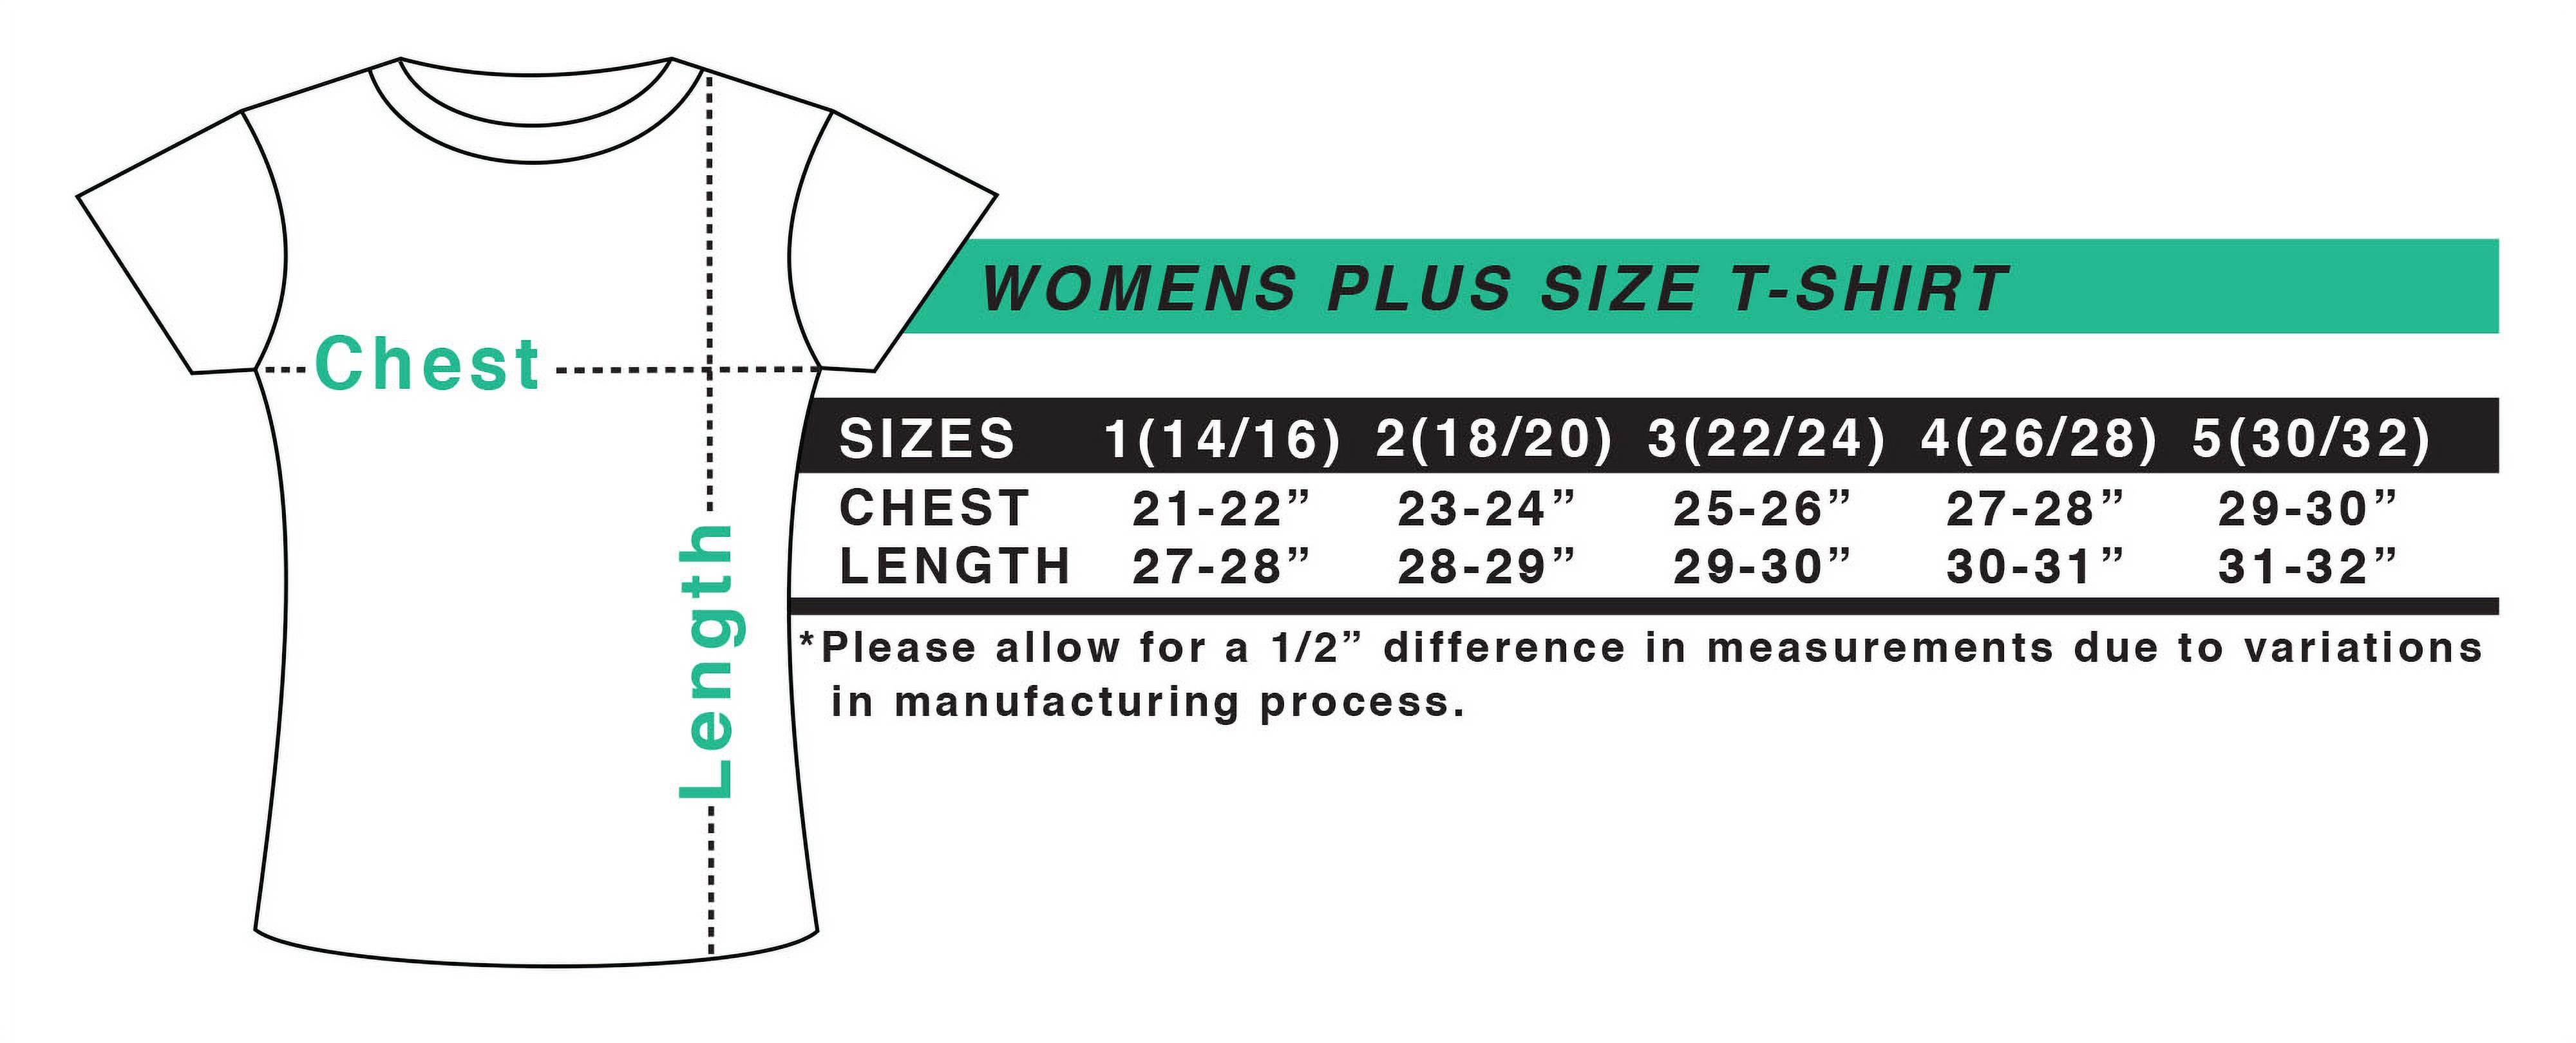 Inktastic Icy Blue Winter Snowflake Women's Plus Size T-Shirt - image 2 of 4